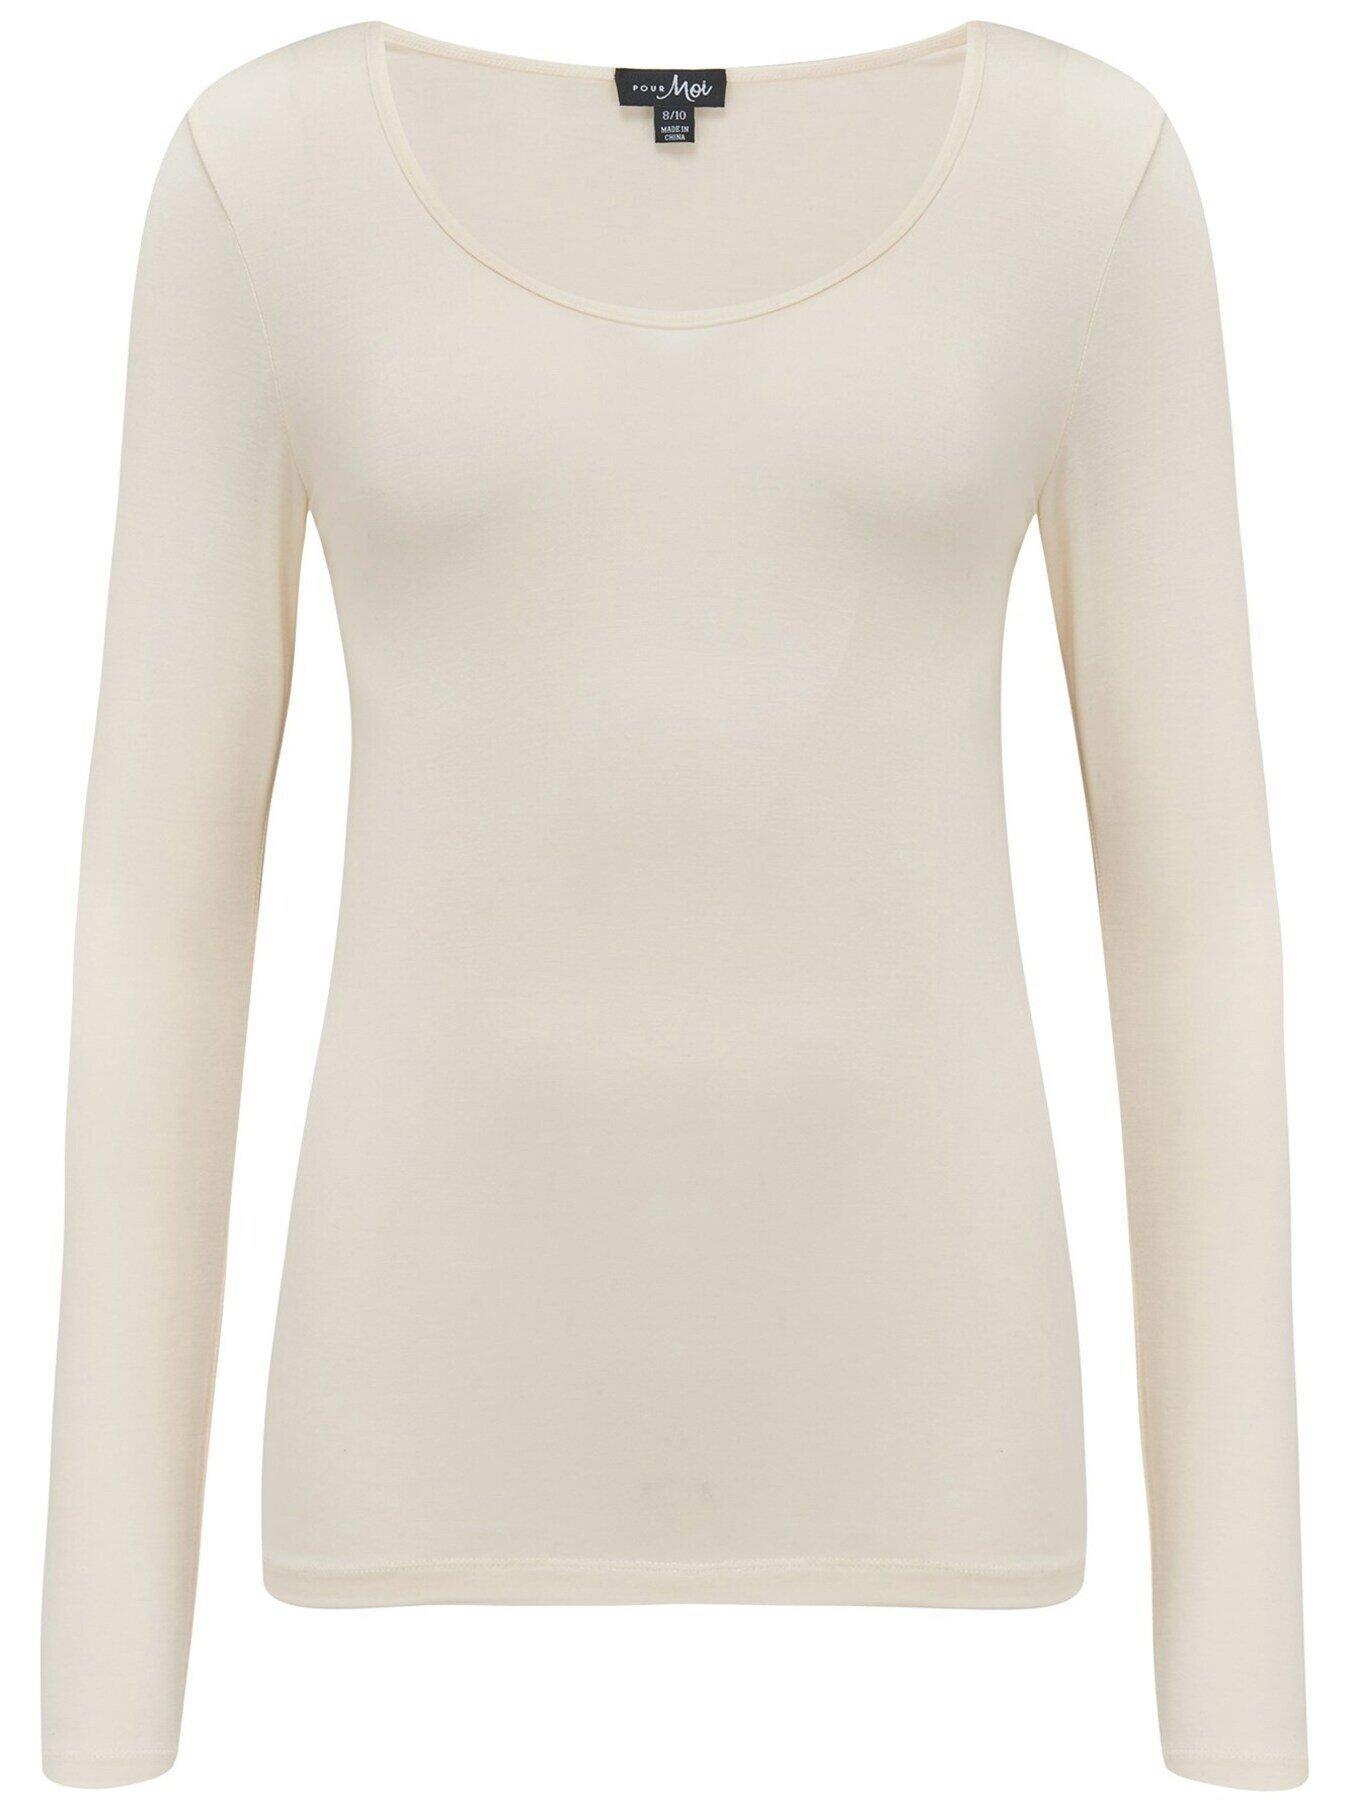 Pour Moi Second Skin Thermal Cami Top